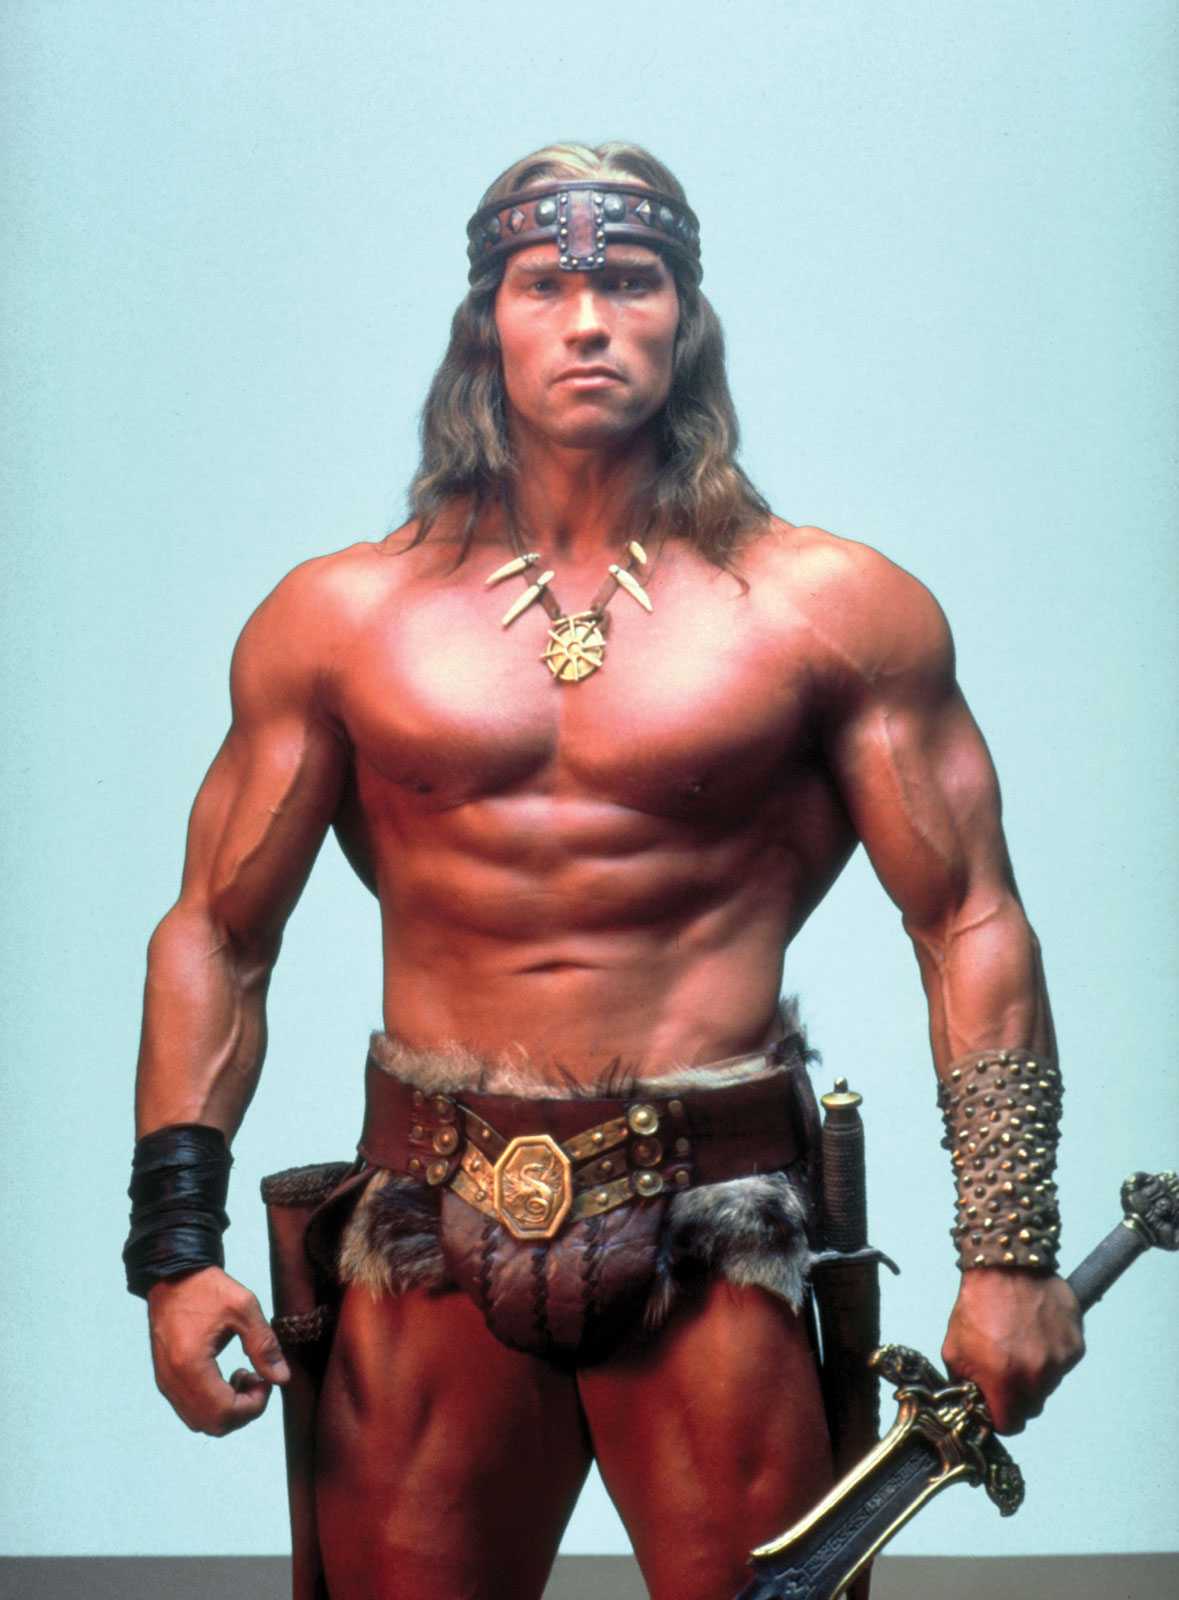 Conan The Barbarian Backgrounds, Compatible - PC, Mobile, Gadgets| 1179x1600 px